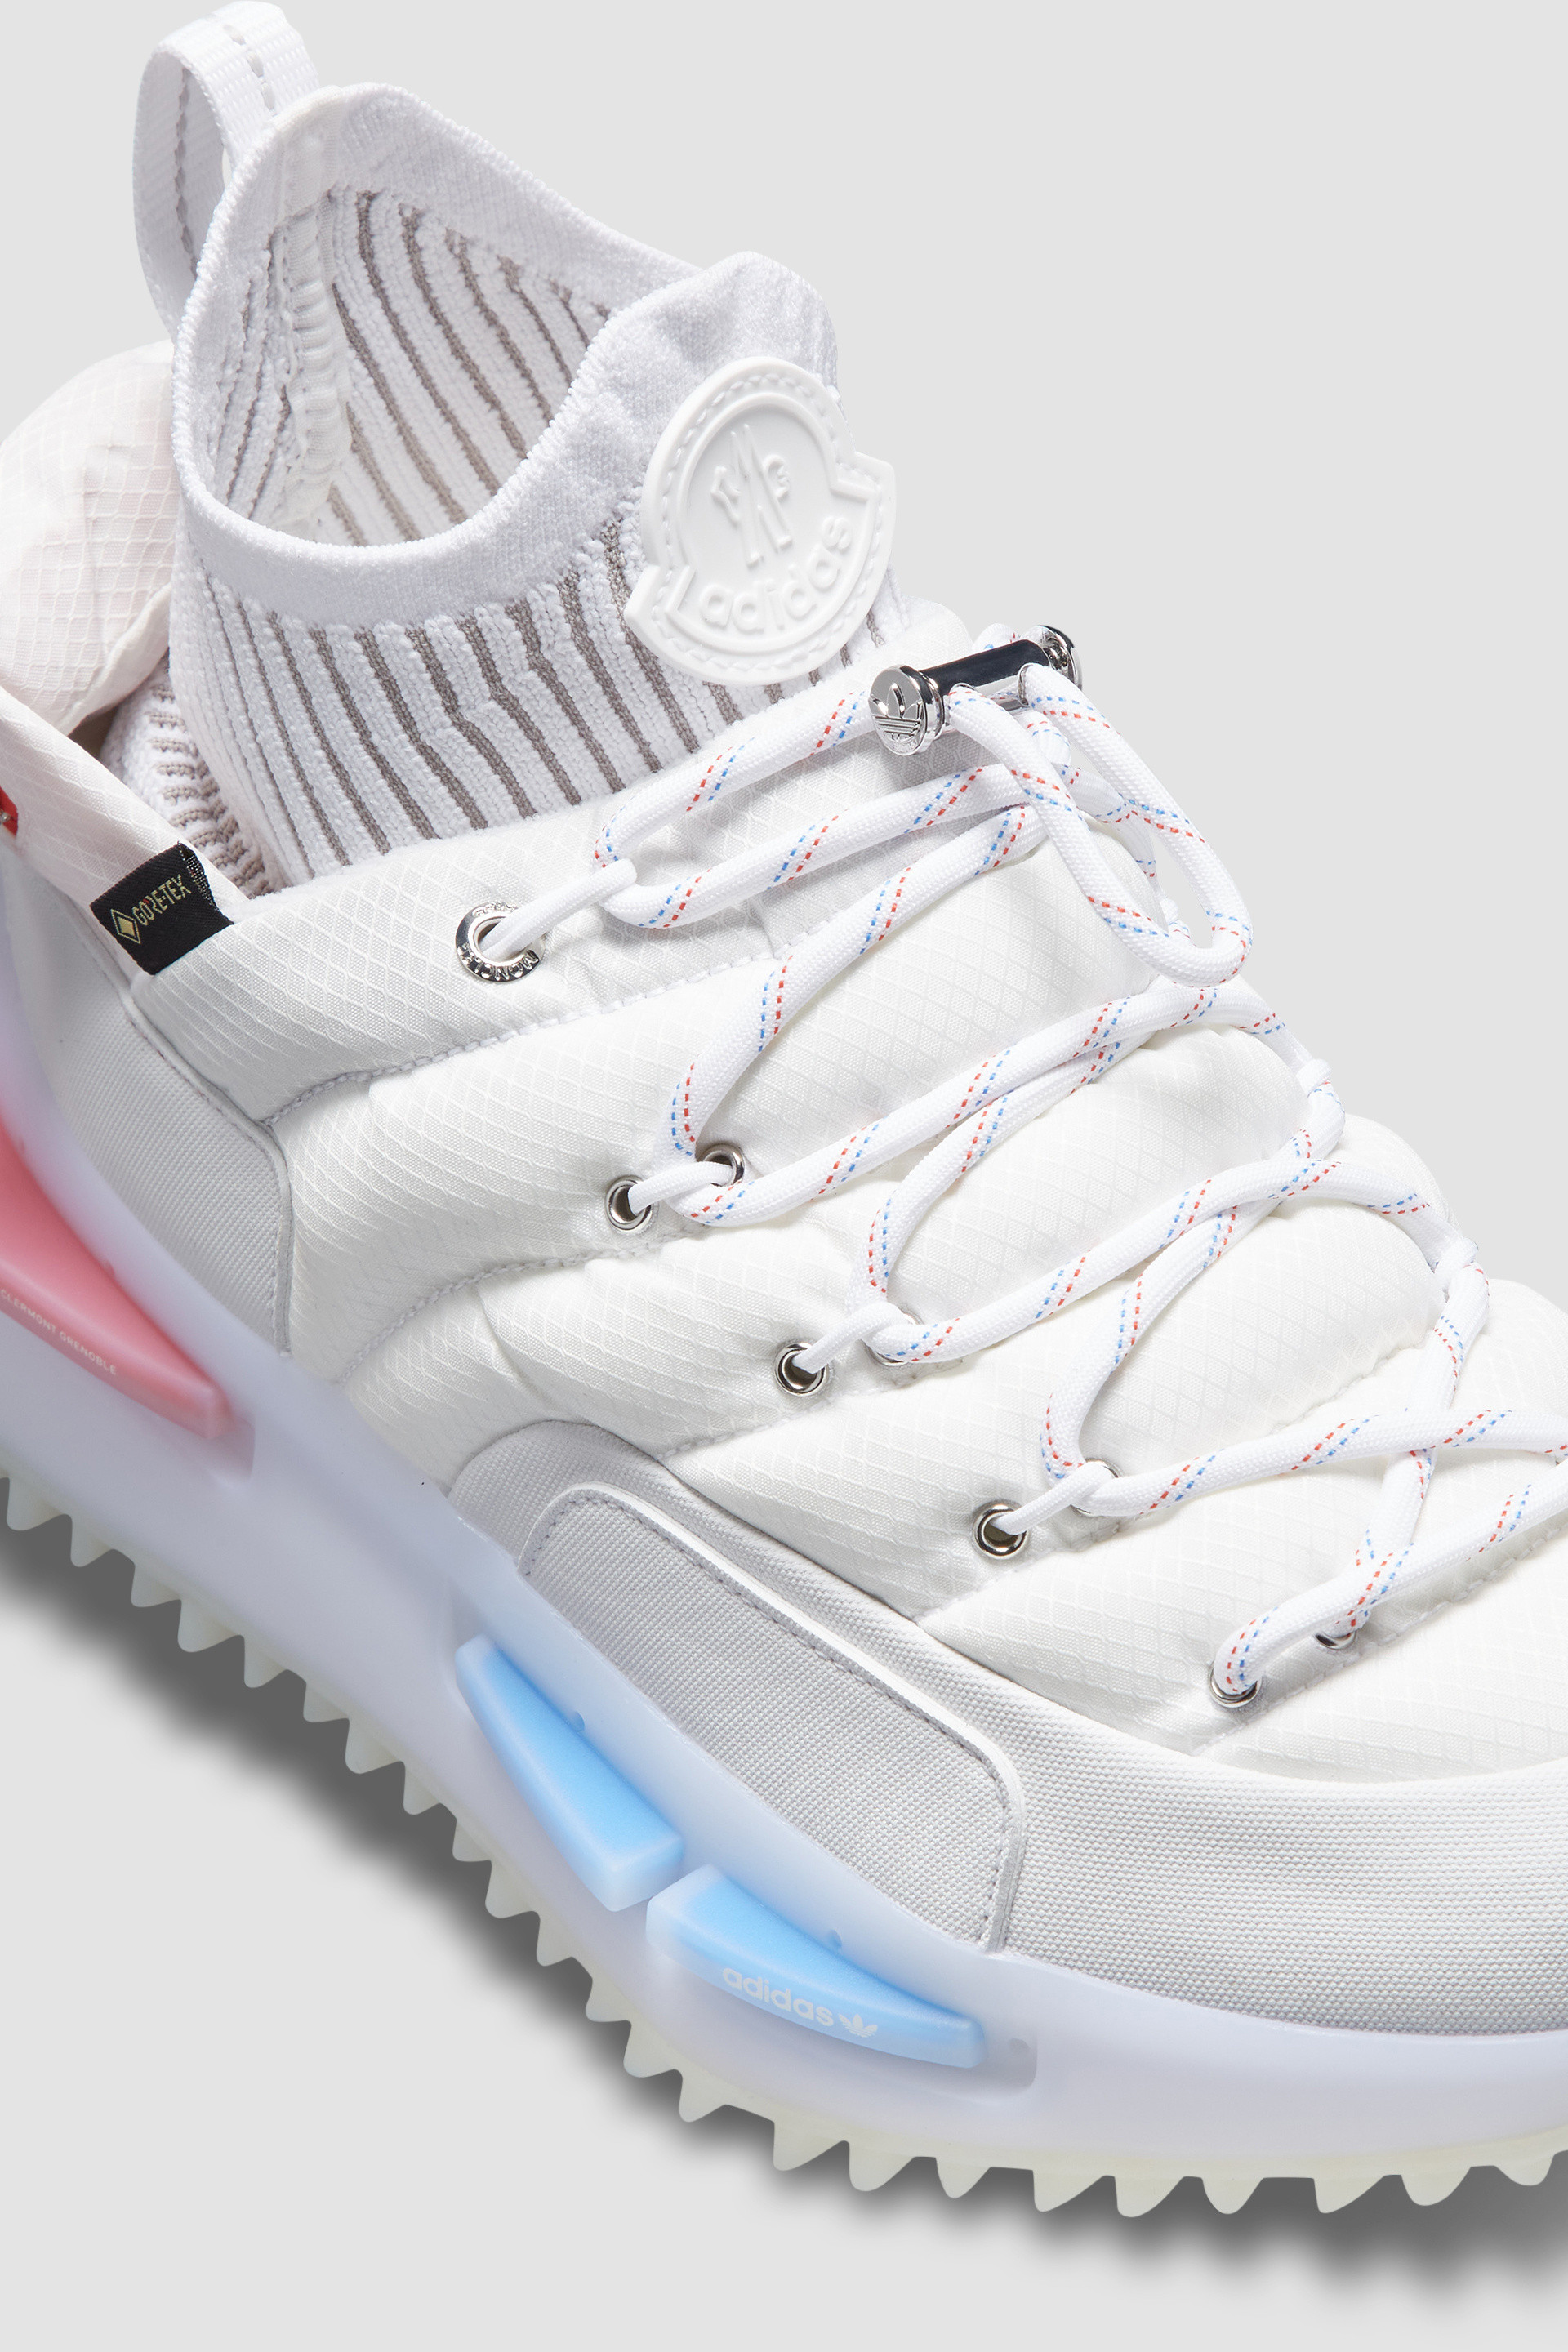 Optical White Moncler NMD Runner Sneakers - Moncler x adidas